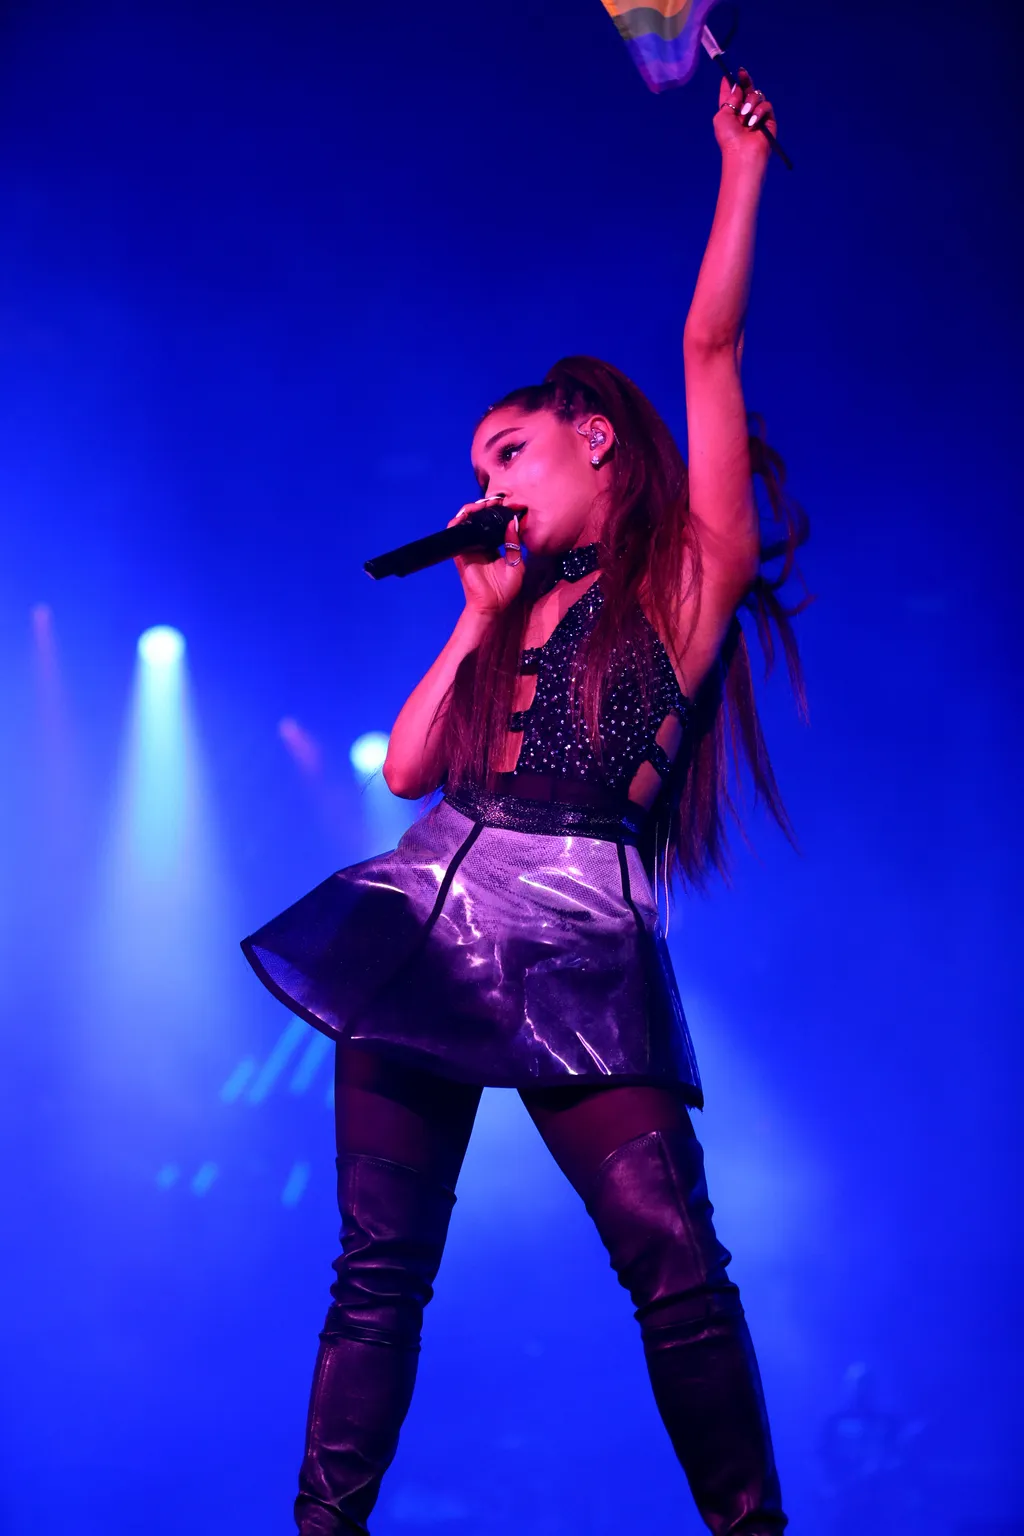 2018 iHeartRadio Wango Tango By AT&T - Show GettyImageRank2 Performance VERTICAL USA California City Of Los Angeles MUSIC Photography FASHION Arts Culture and Entertainment Celebrities AT&T Wango Tango Music Festival Ariana Grande A-List Celebrity iHeartR